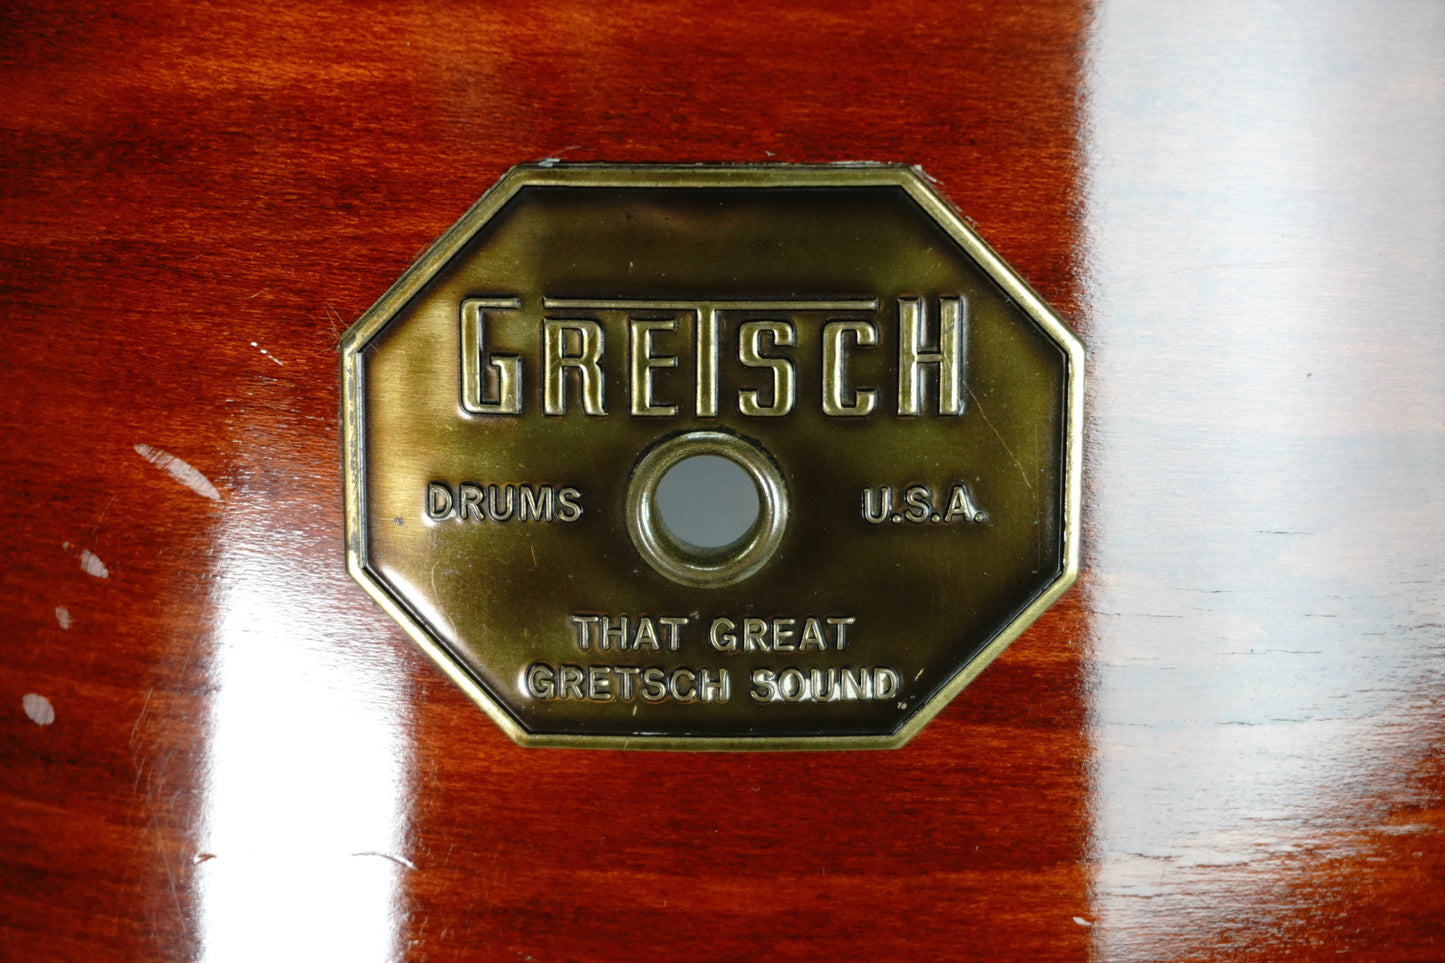 Gretsch USA ‘Stop Sign’ 4-Piece Kit in Rosewood